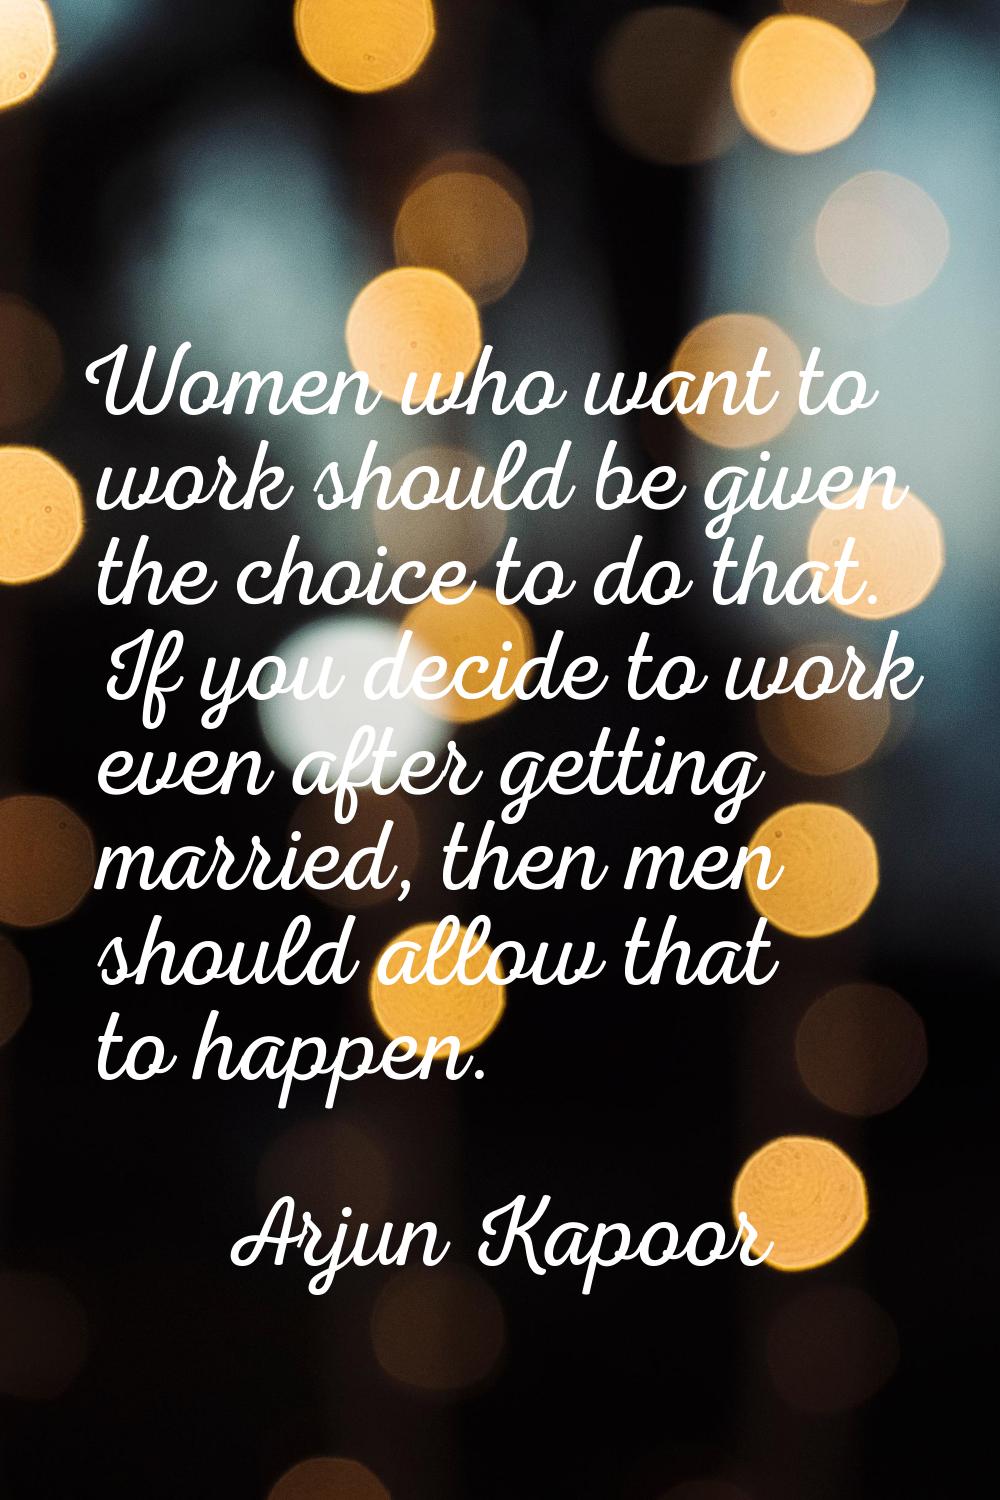 Women who want to work should be given the choice to do that. If you decide to work even after gett